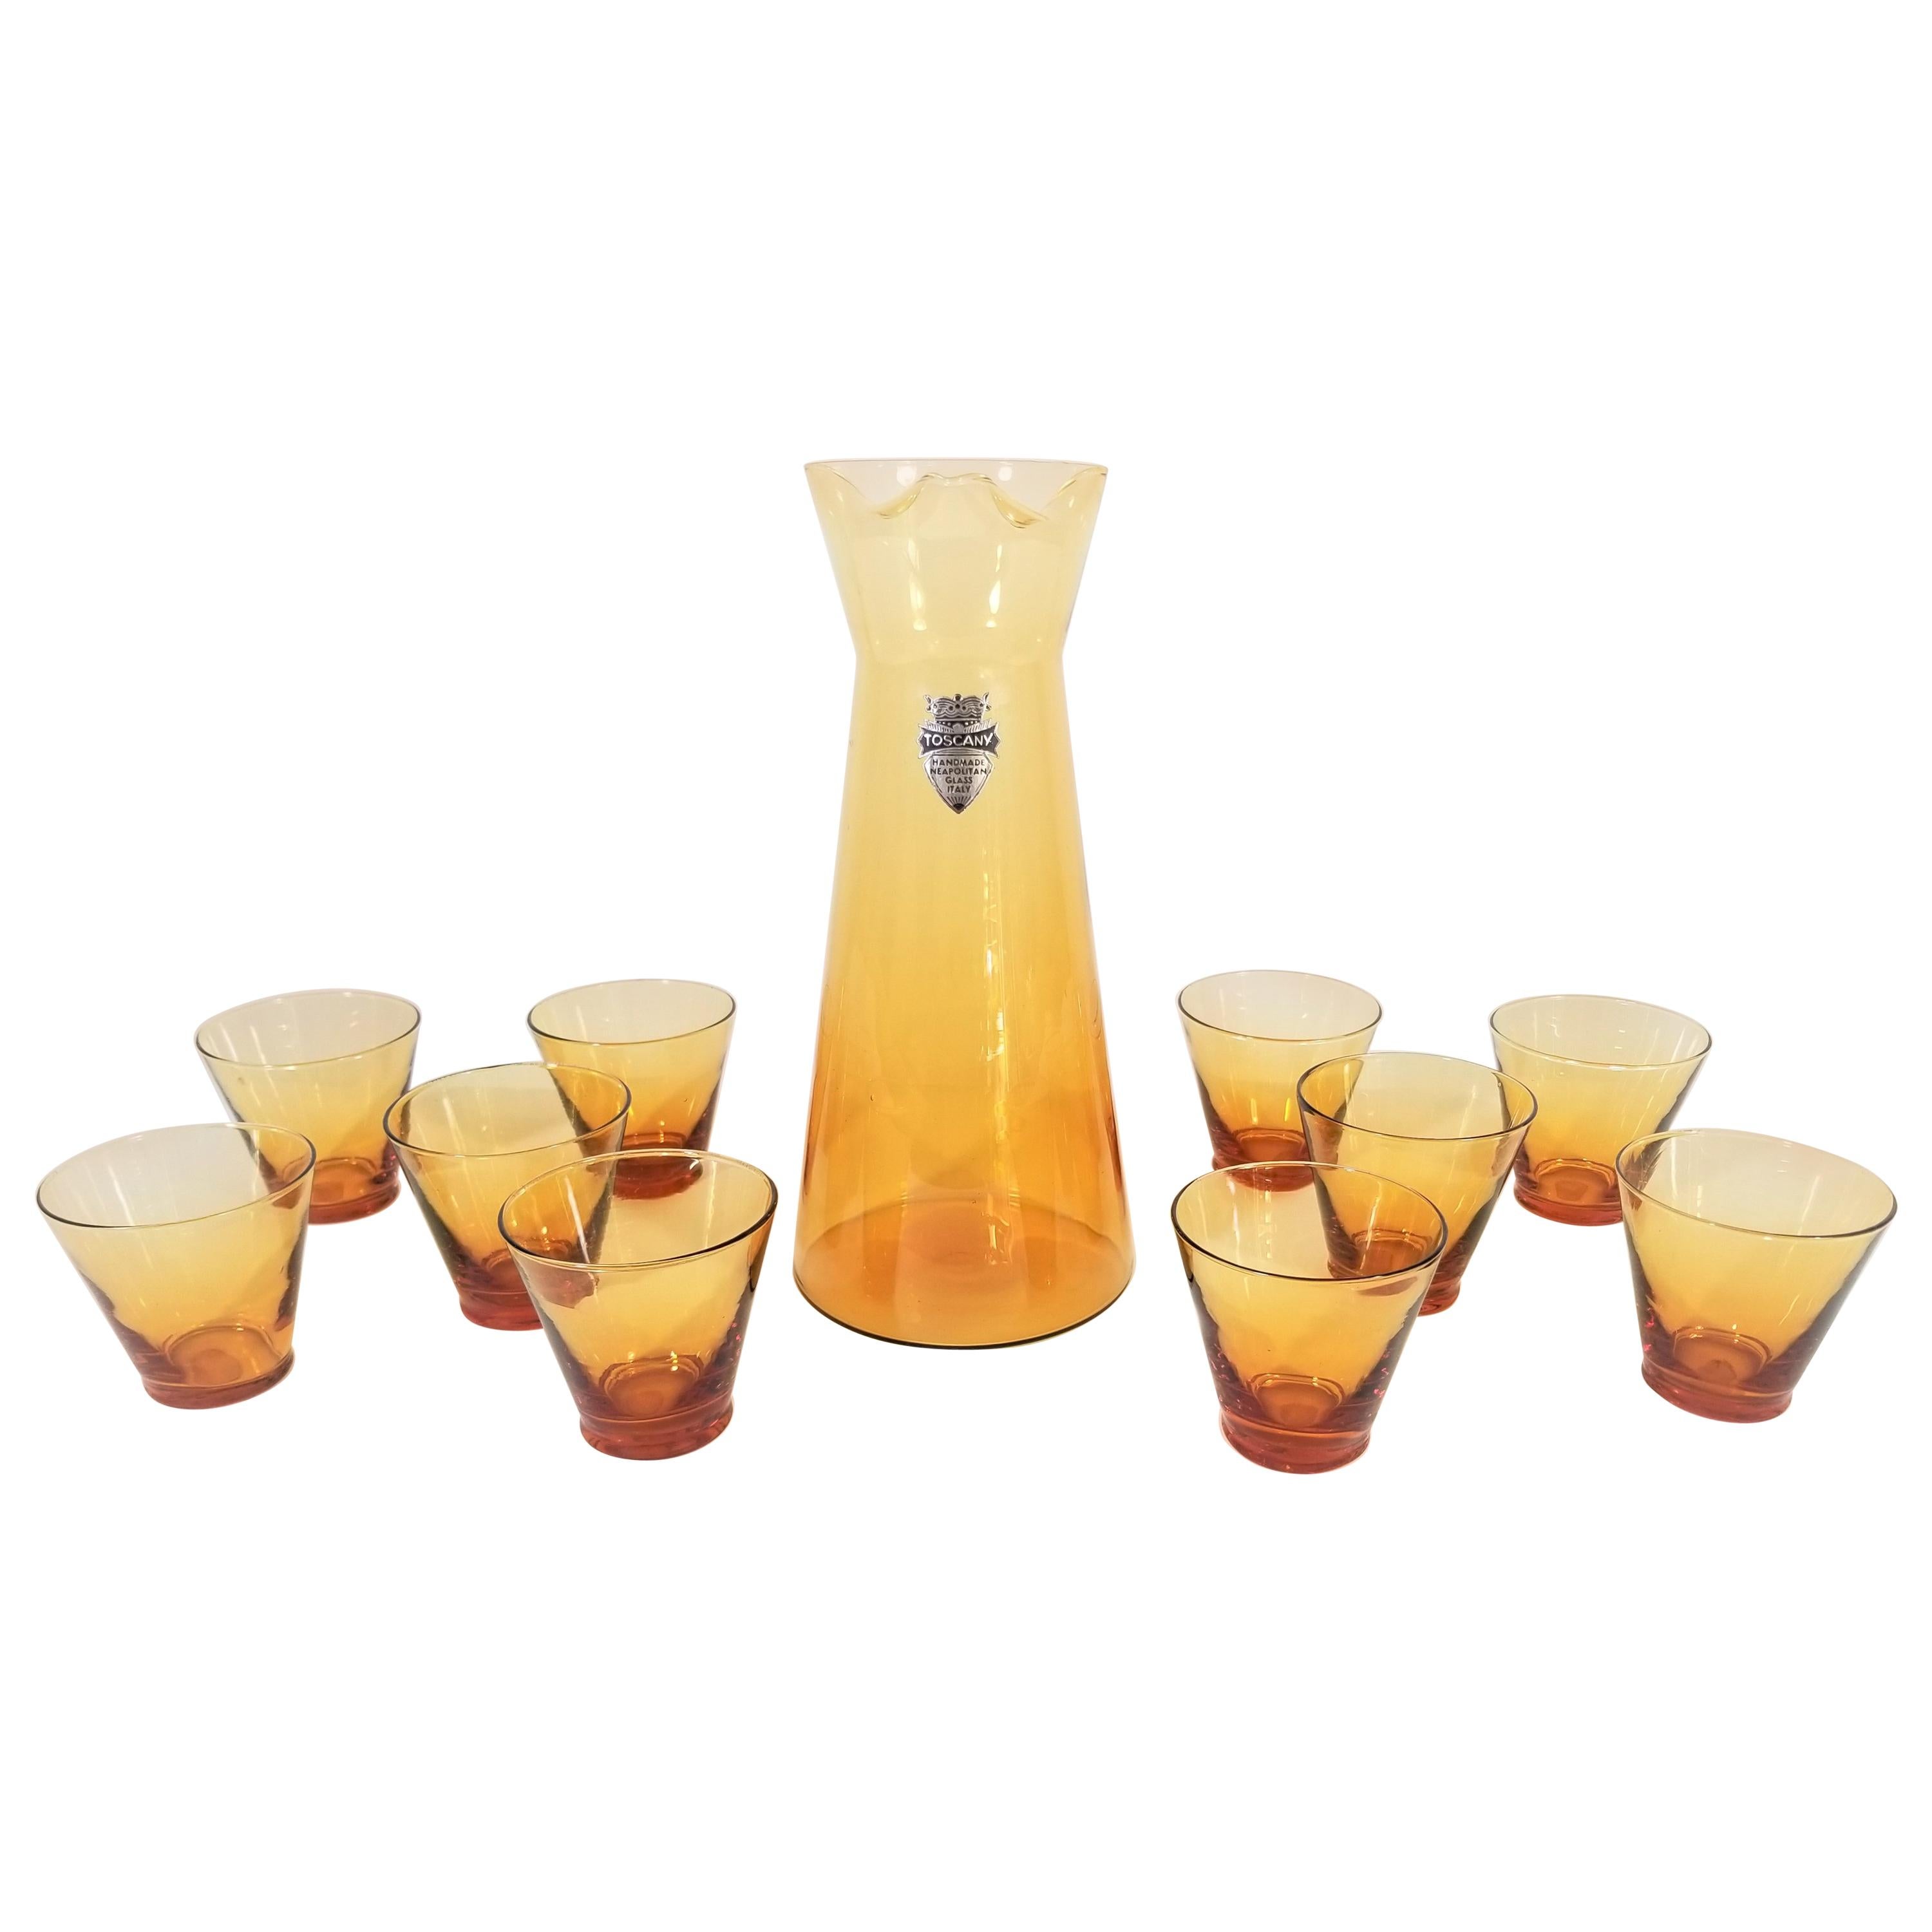 Italian Amber Tuscany Midcentury Cocktail Bar Set Made in Italy Never Used